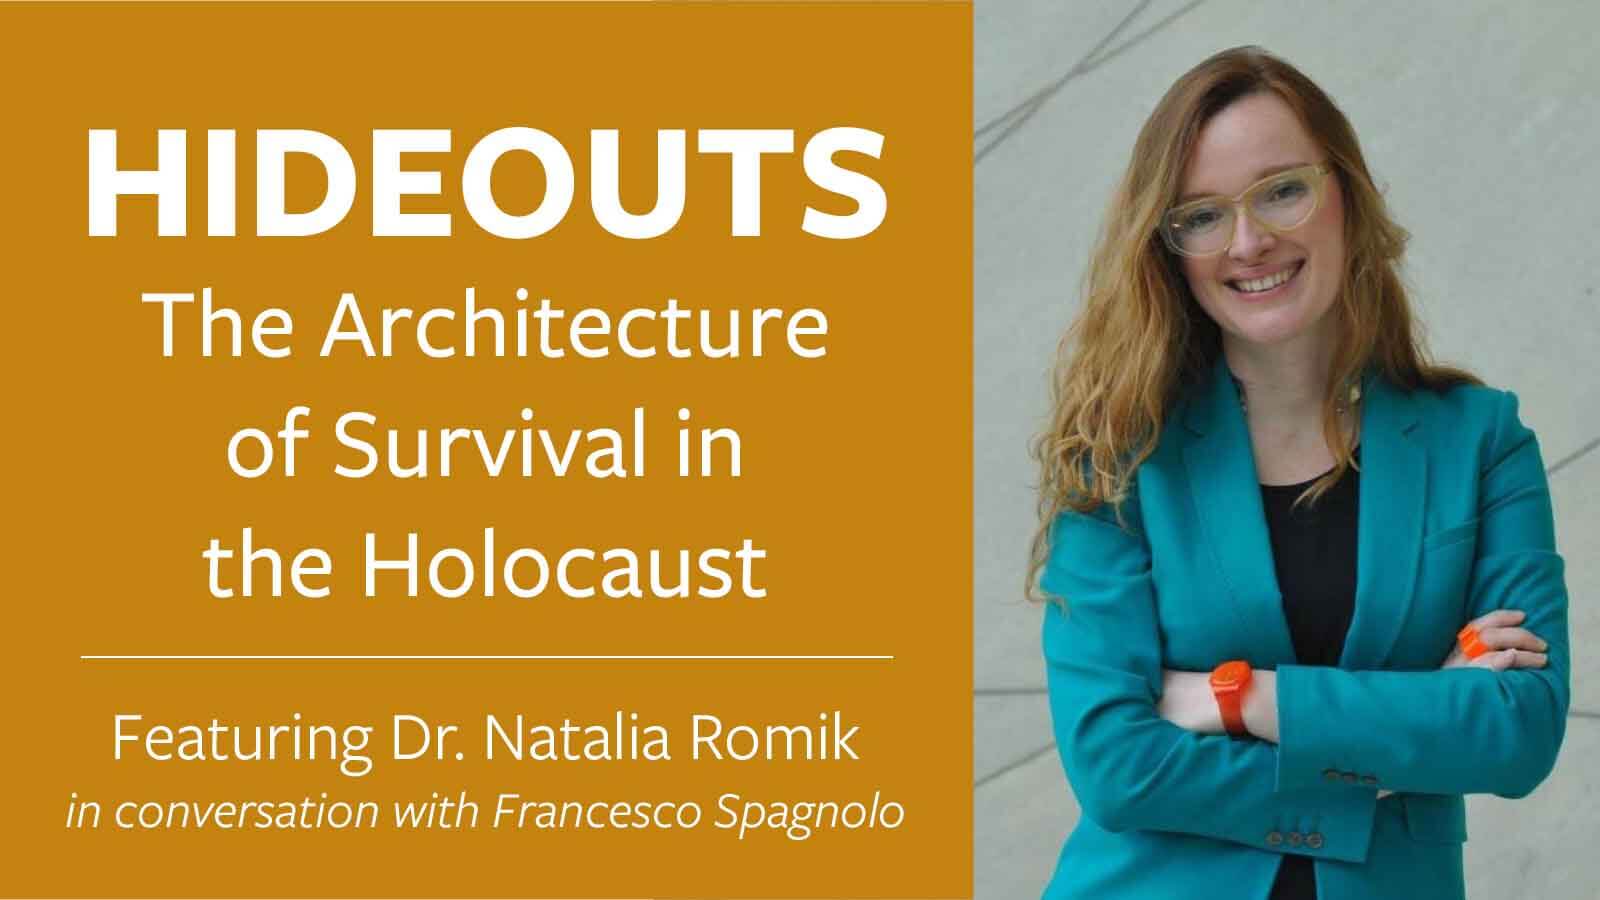 Hideouts. The Architecture of Survival in the Holocaust